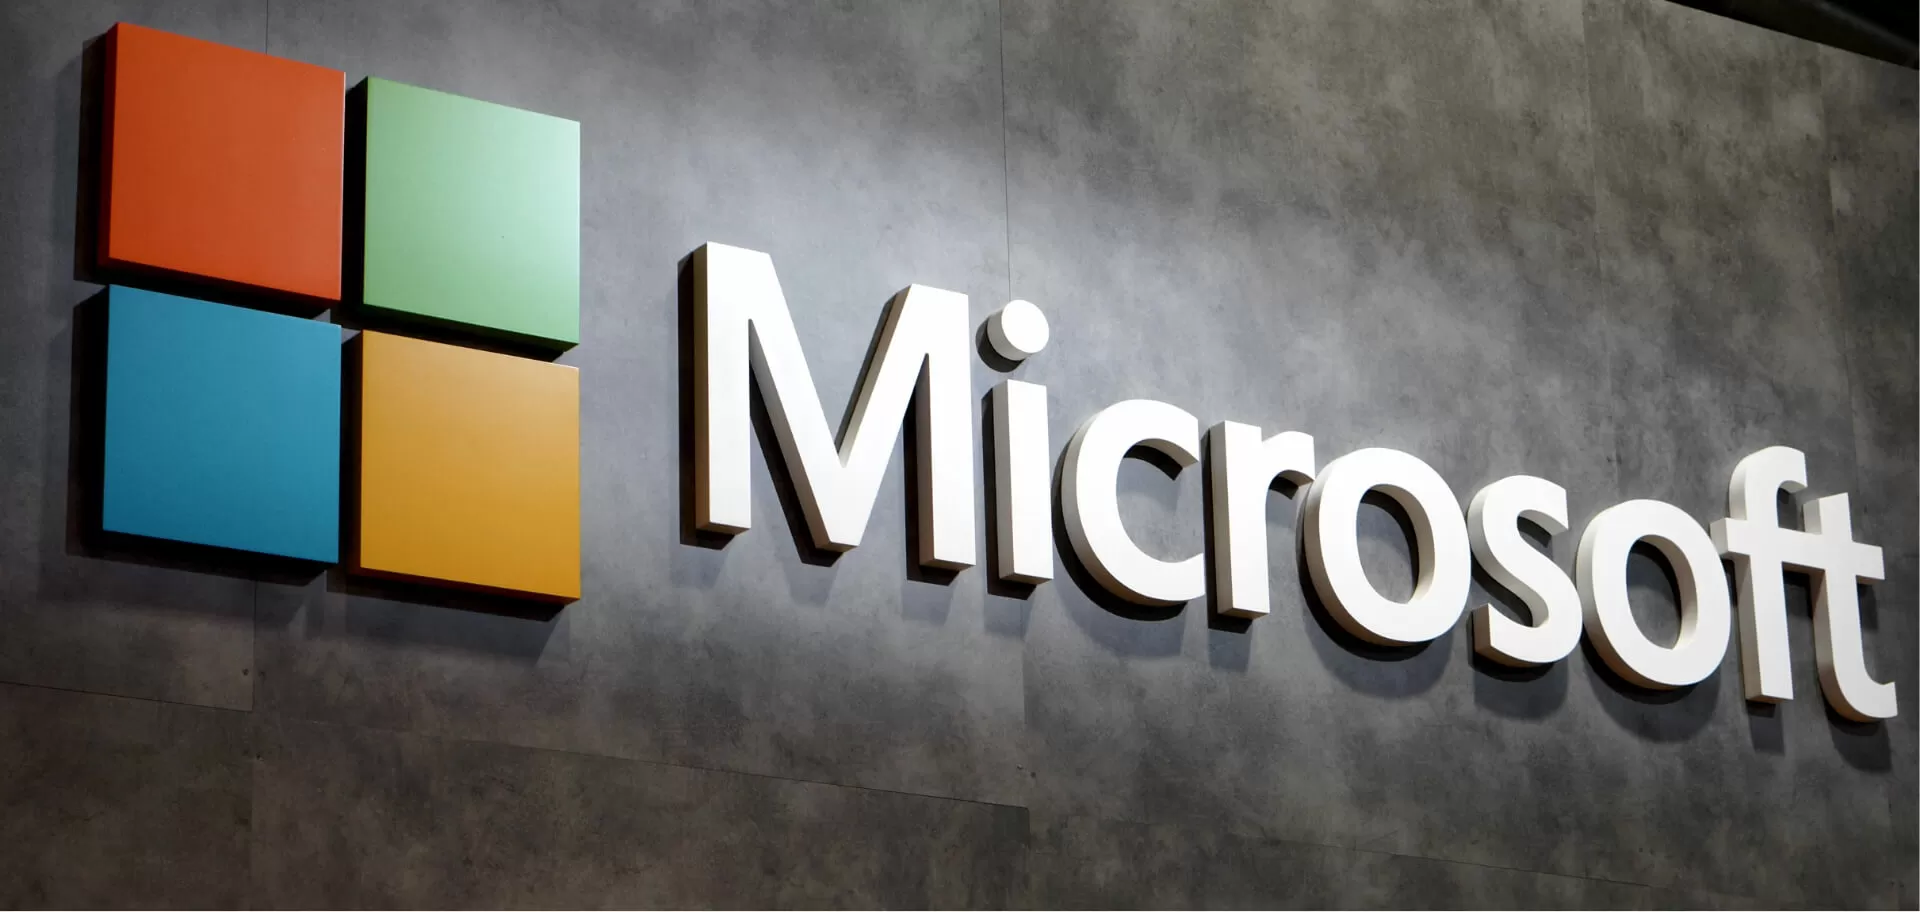 Microsoft voted the most ethical company in the US